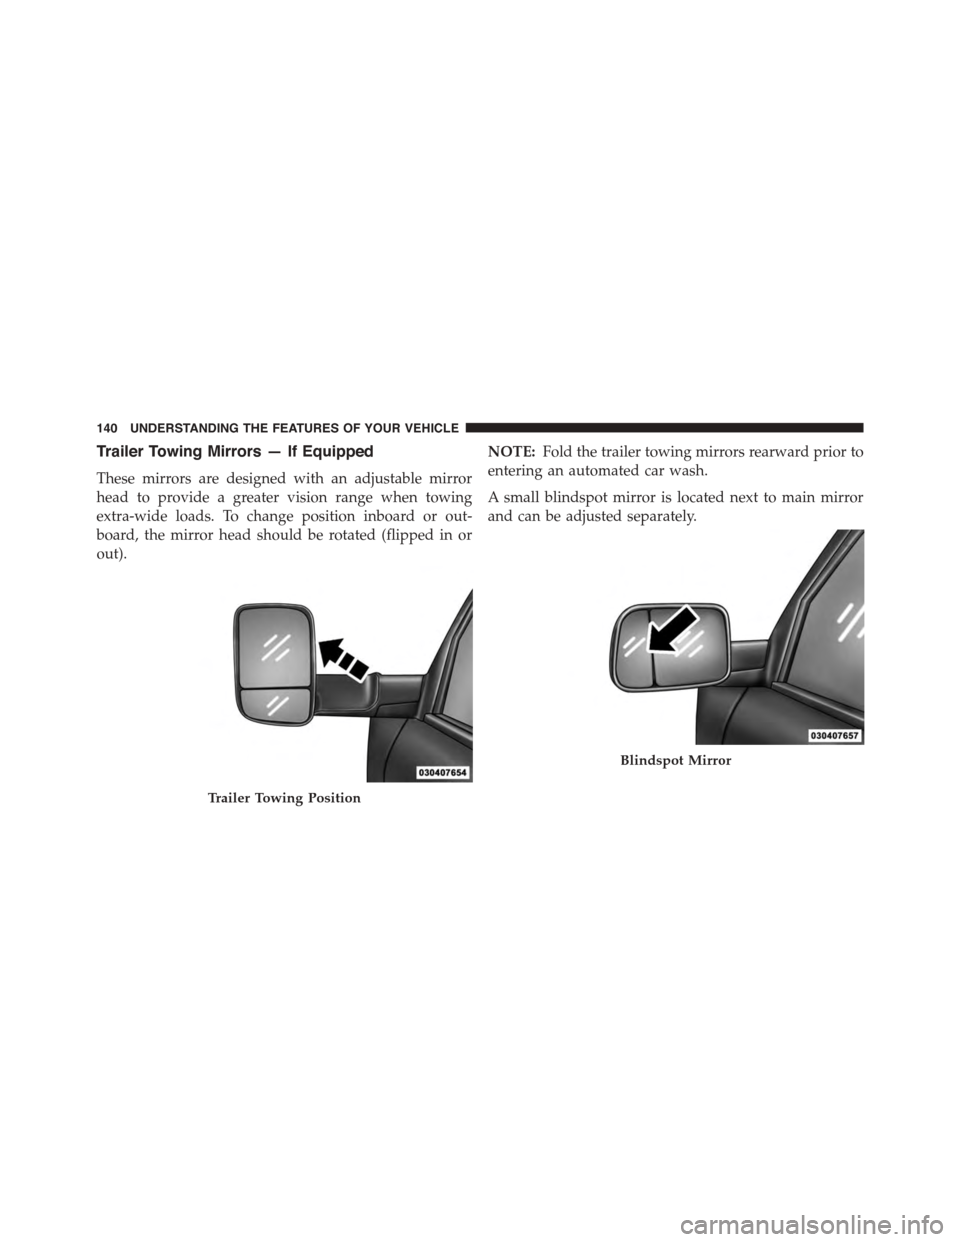 Ram 1500 2015  Owners Manual Trailer Towing Mirrors — If Equipped
These mirrors are designed with an adjustable mirror
head to provide a greater vision range when towing
extra-wide loads. To change position inboard or out-
boar